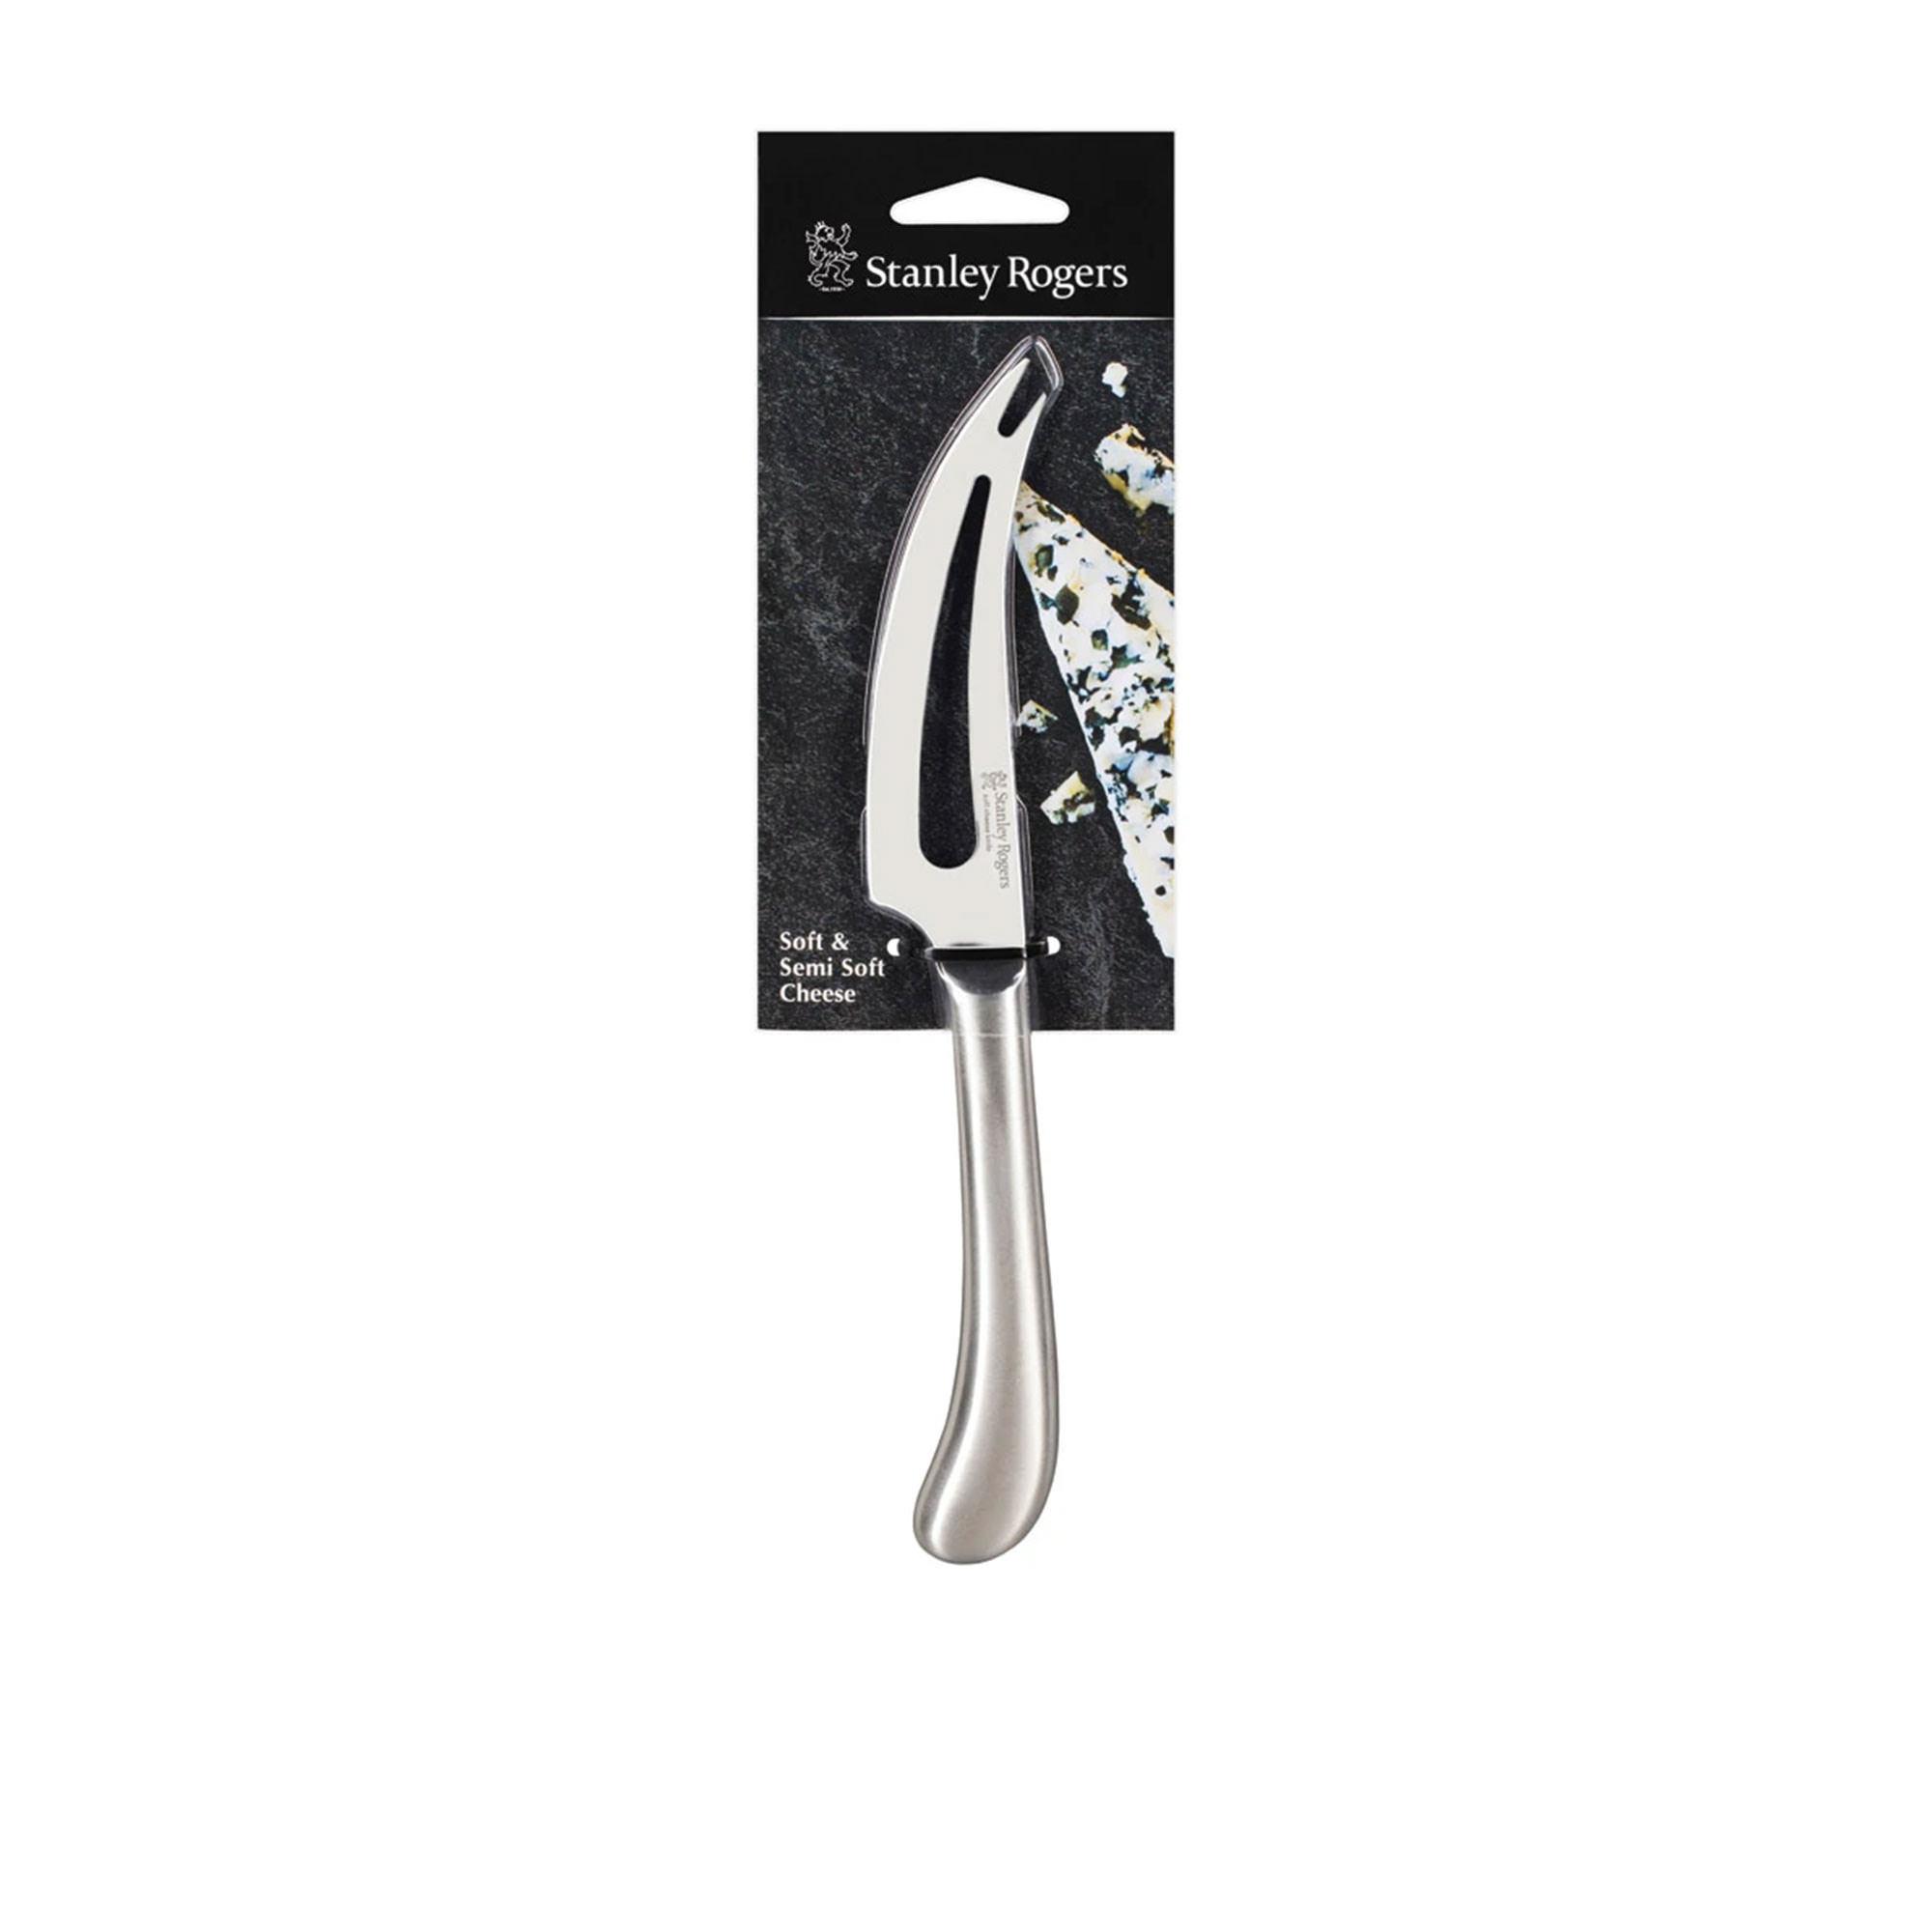 Stanley Rogers Slotted Soft Cheese Knife Image 5